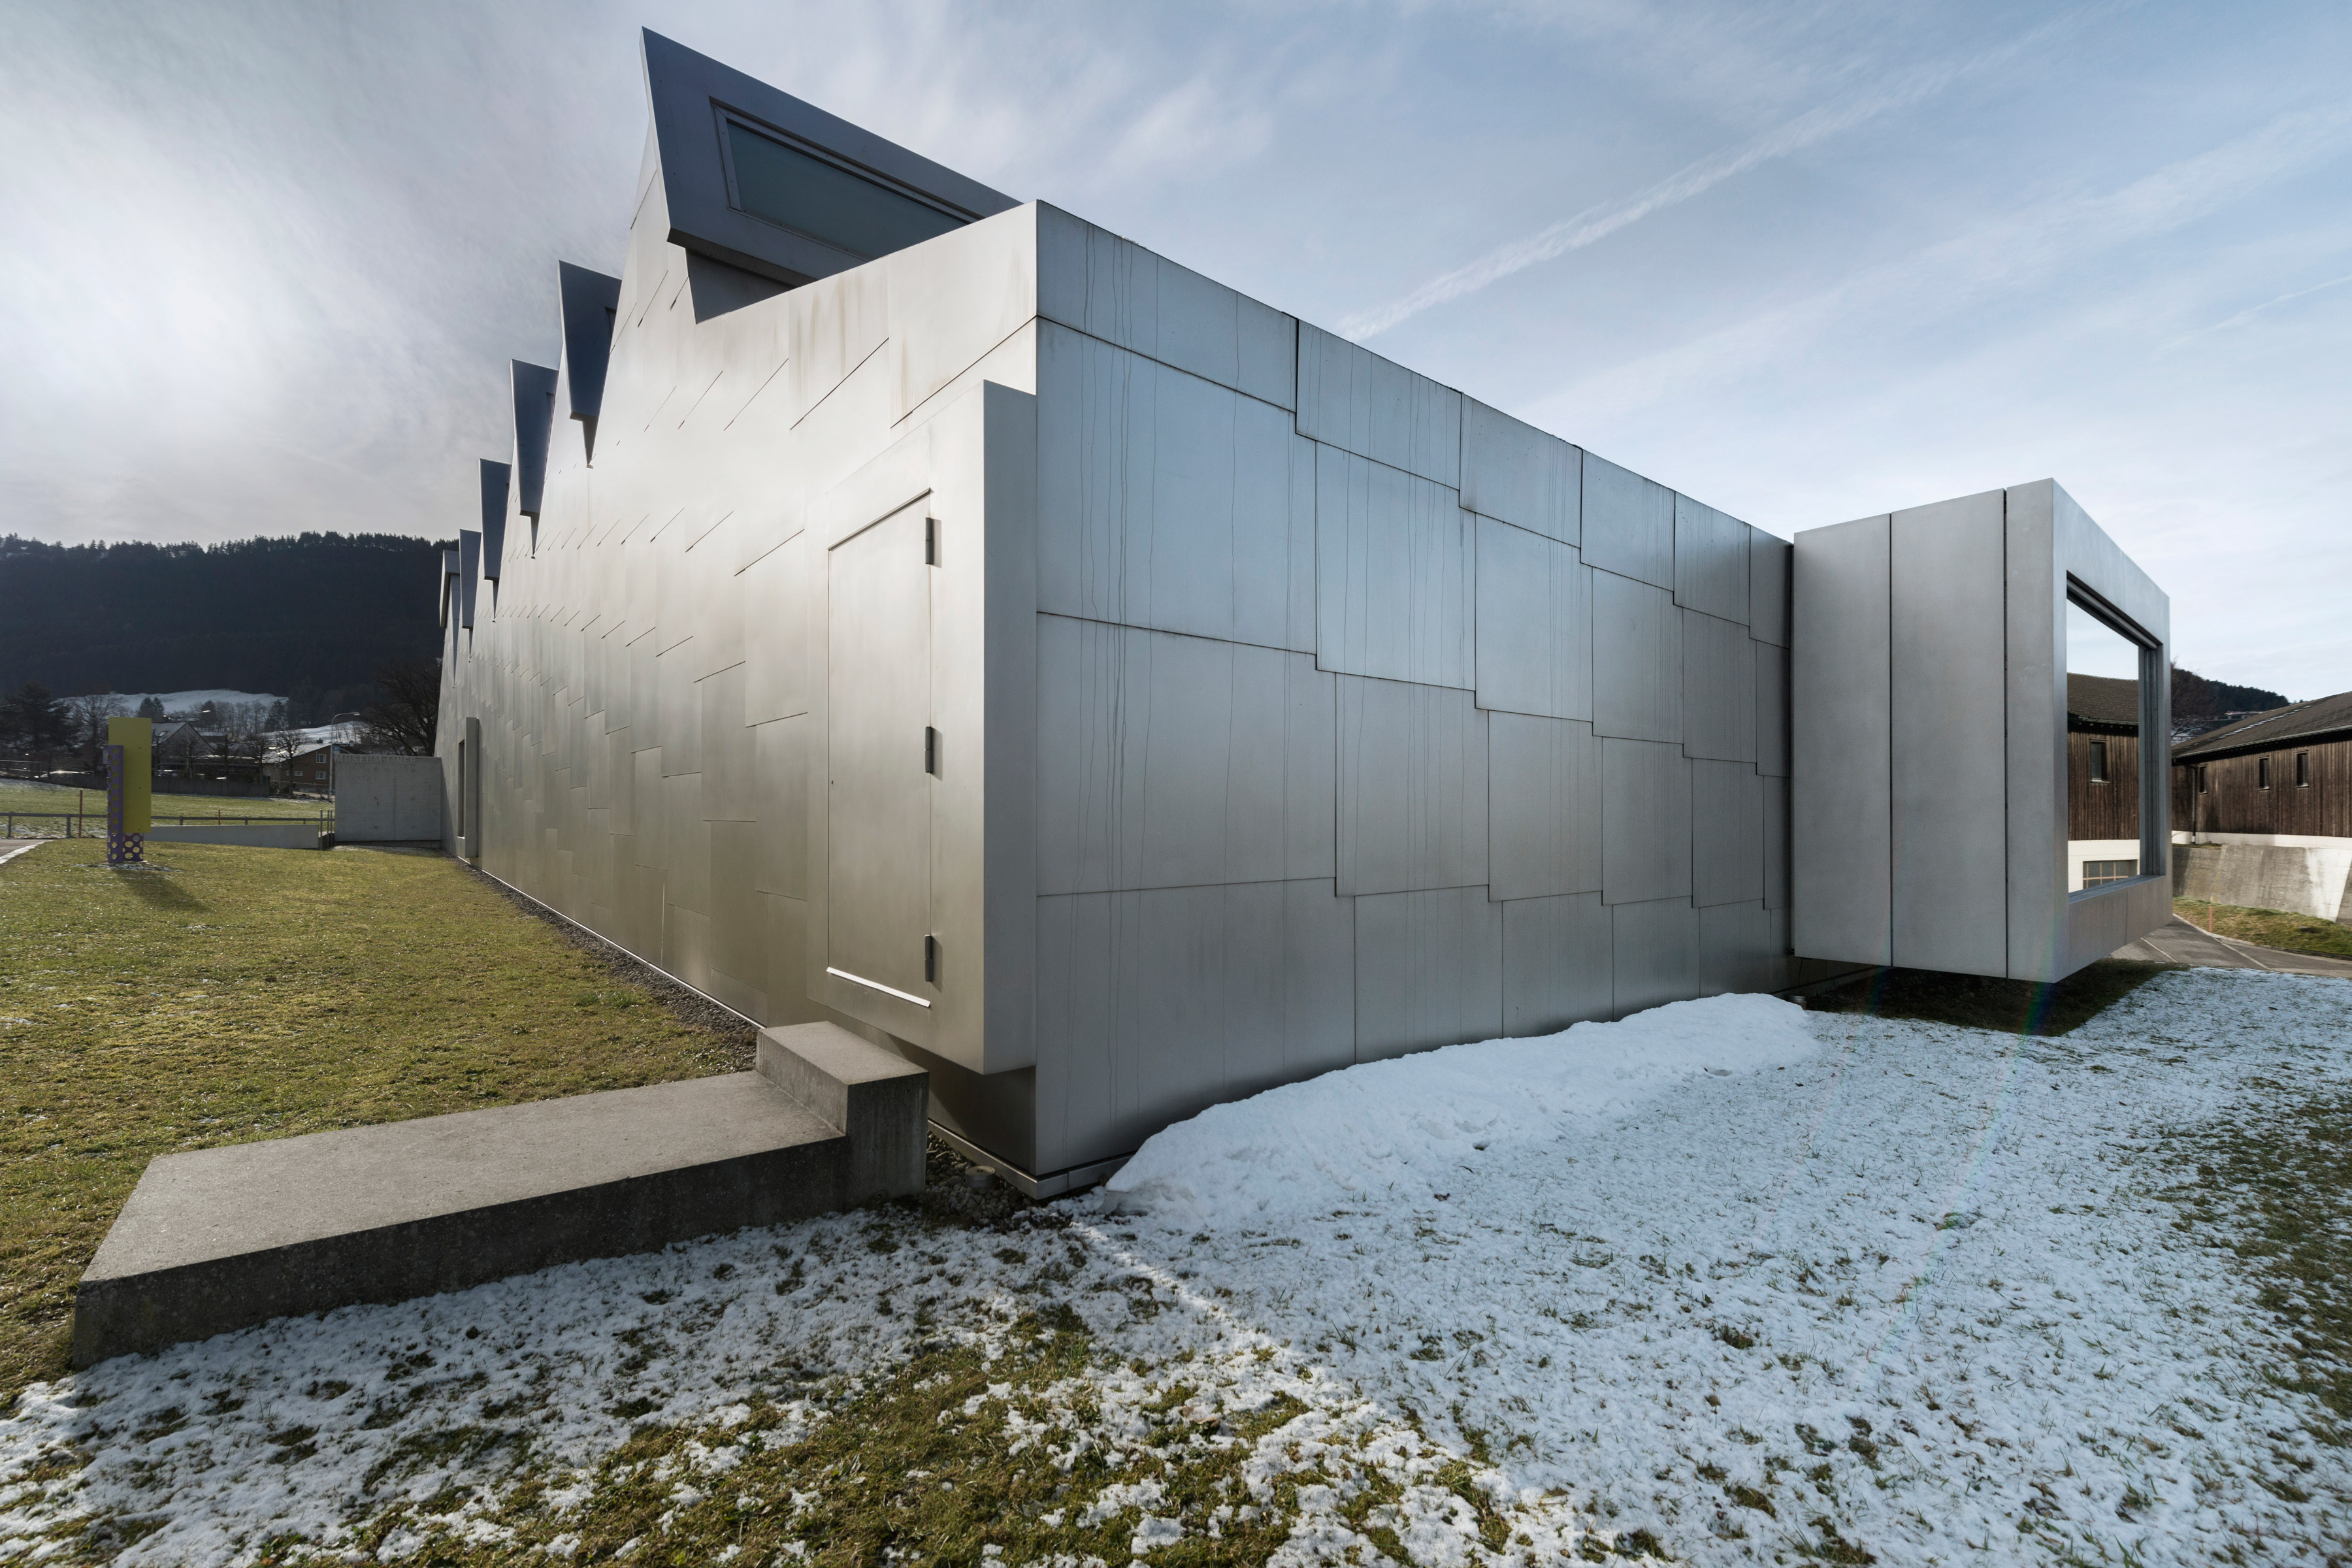 Architecture photo about Kunstmuseum Appenzell art museum